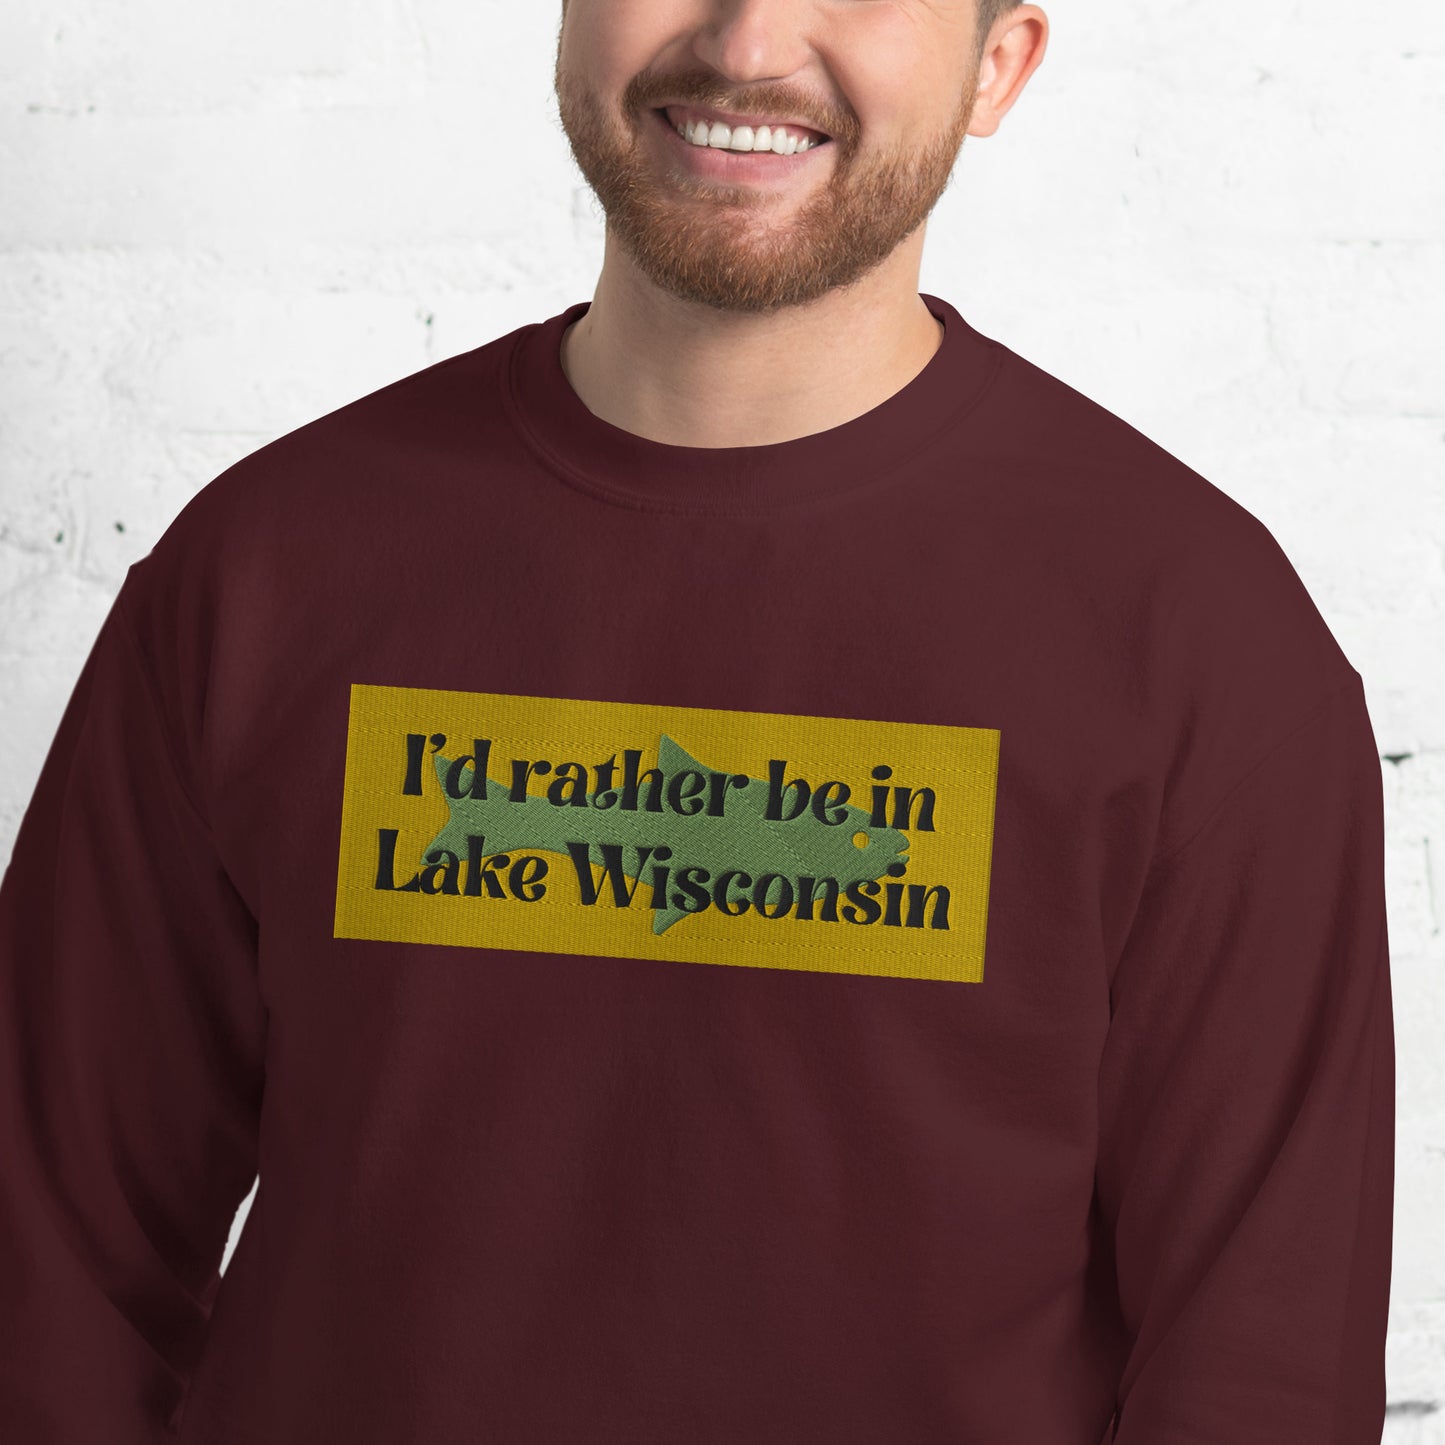 I'd Rather Be In Lake Wisconsin Embroidered Sweatshirt